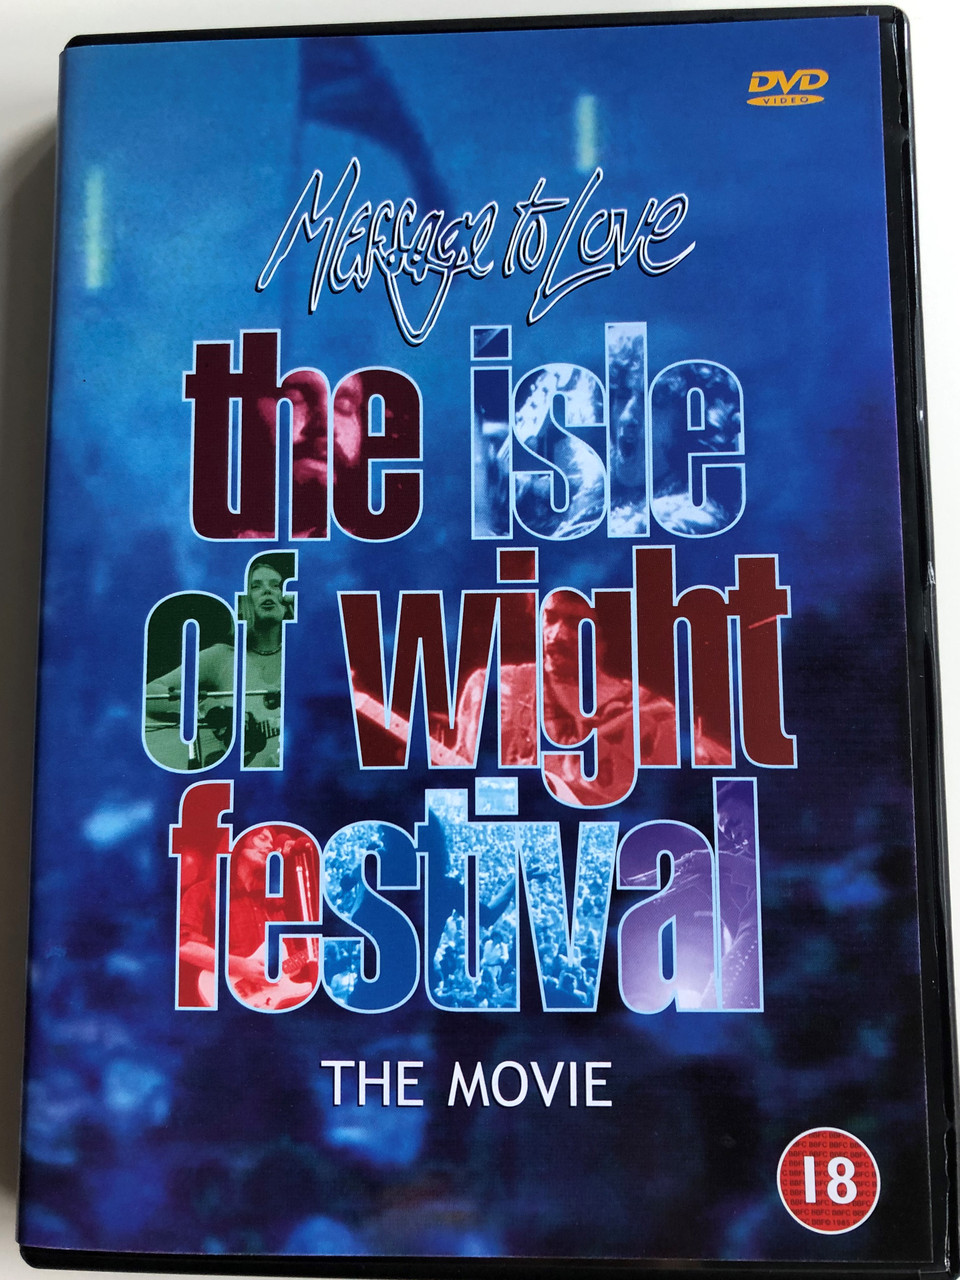 Message to Love / The Isle of Wight Festival The Movie DVD 1995 / Directed  by Murray Lerner / Live performances by The Doors, The Who, The Moody  Blues, Jimi Hendrix - bibleinmylanguage